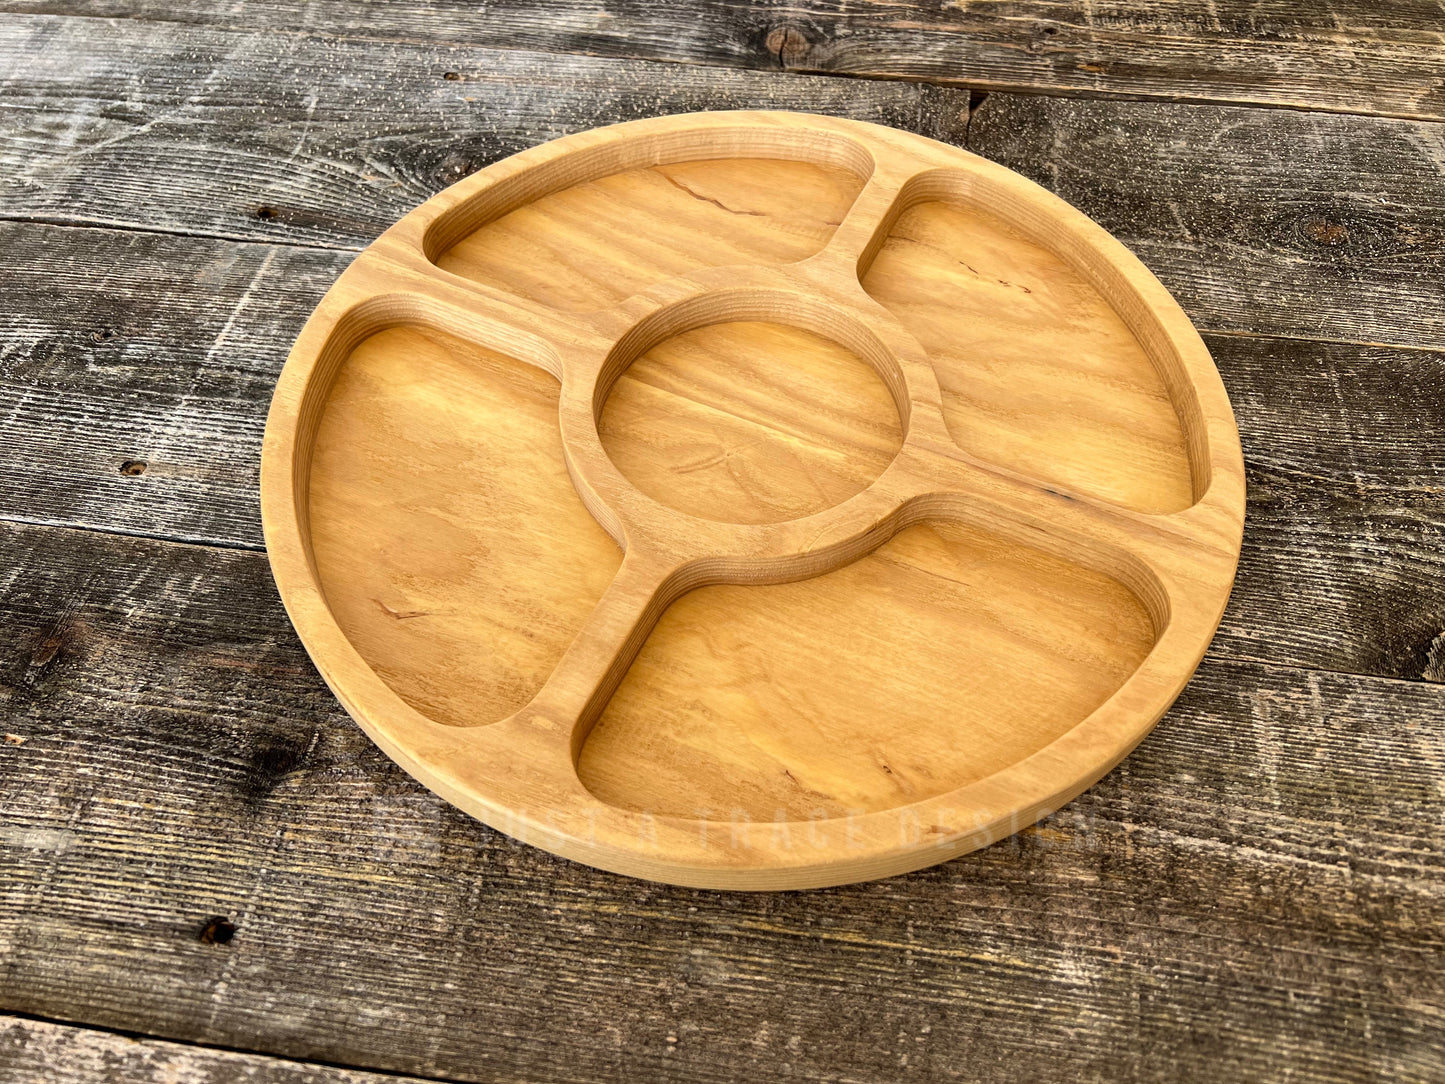 12" 4 Compartment Tray, Charcuterie Tray, Vegetable Tray, Dessert Tray, Wood Platter, Serving Tray, Dish, Handcrafted Gift